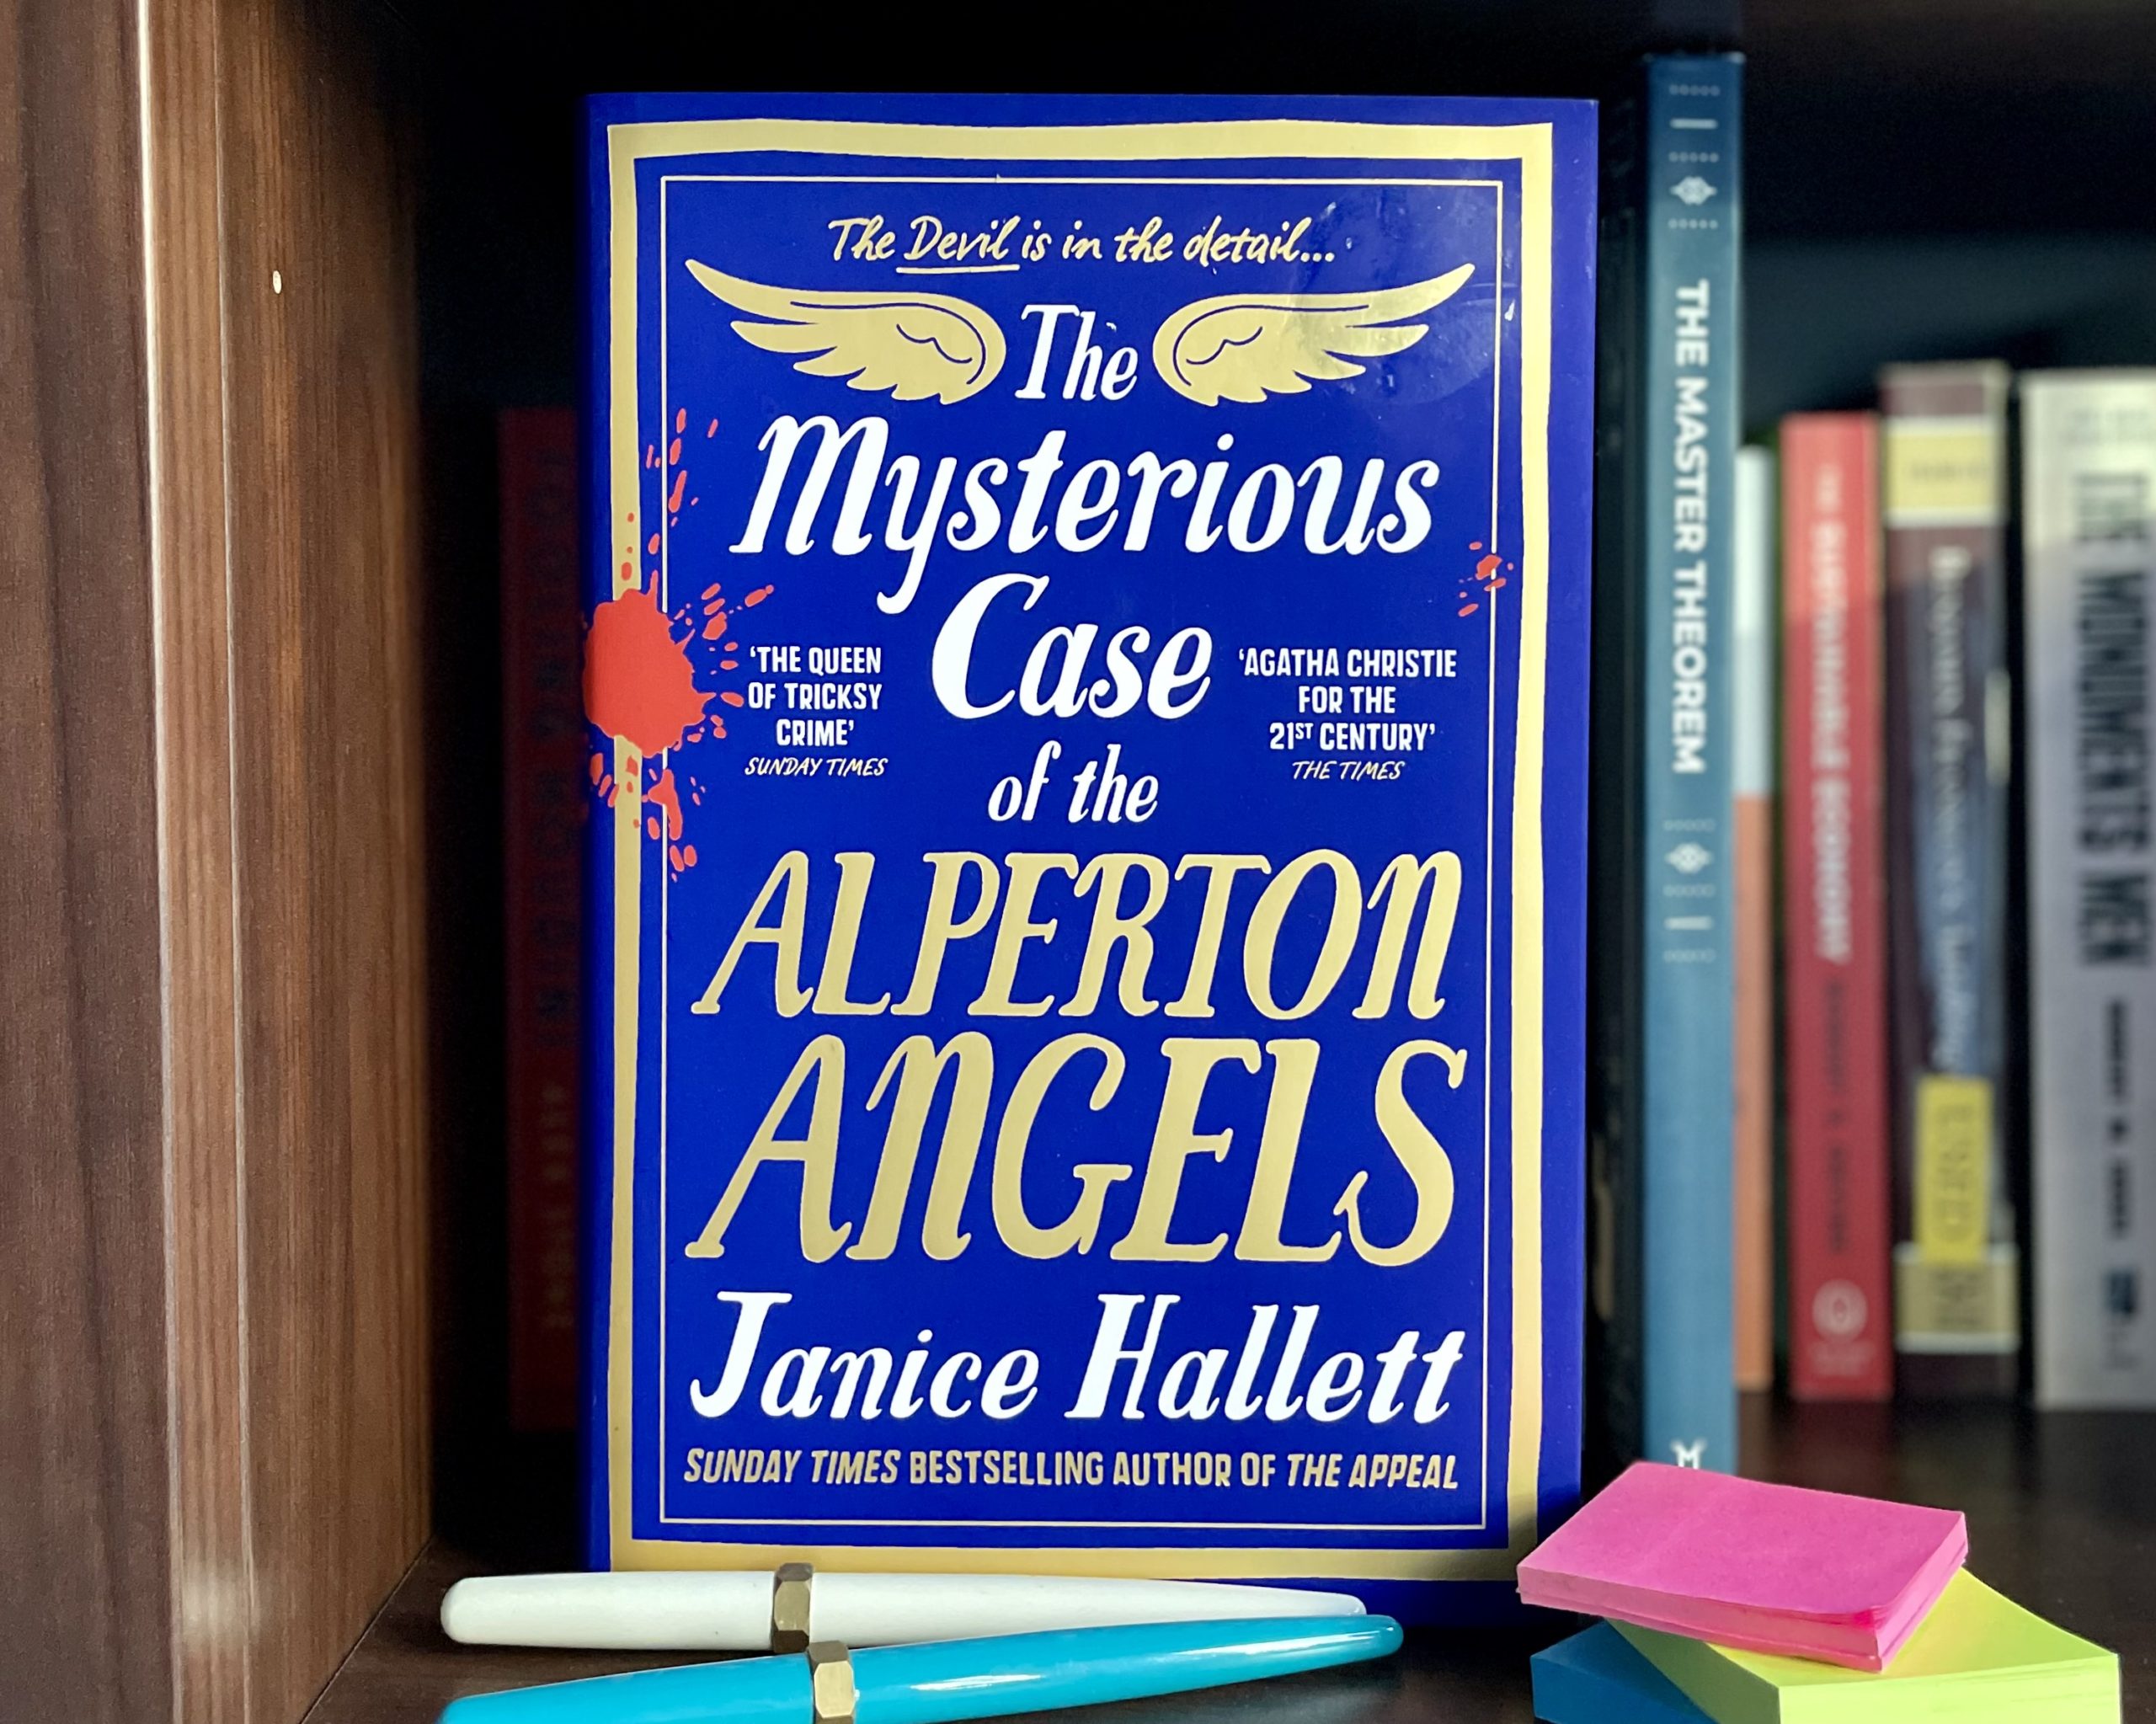 Epistolaries and choice: The Mysterious Case of the Alperton Angels